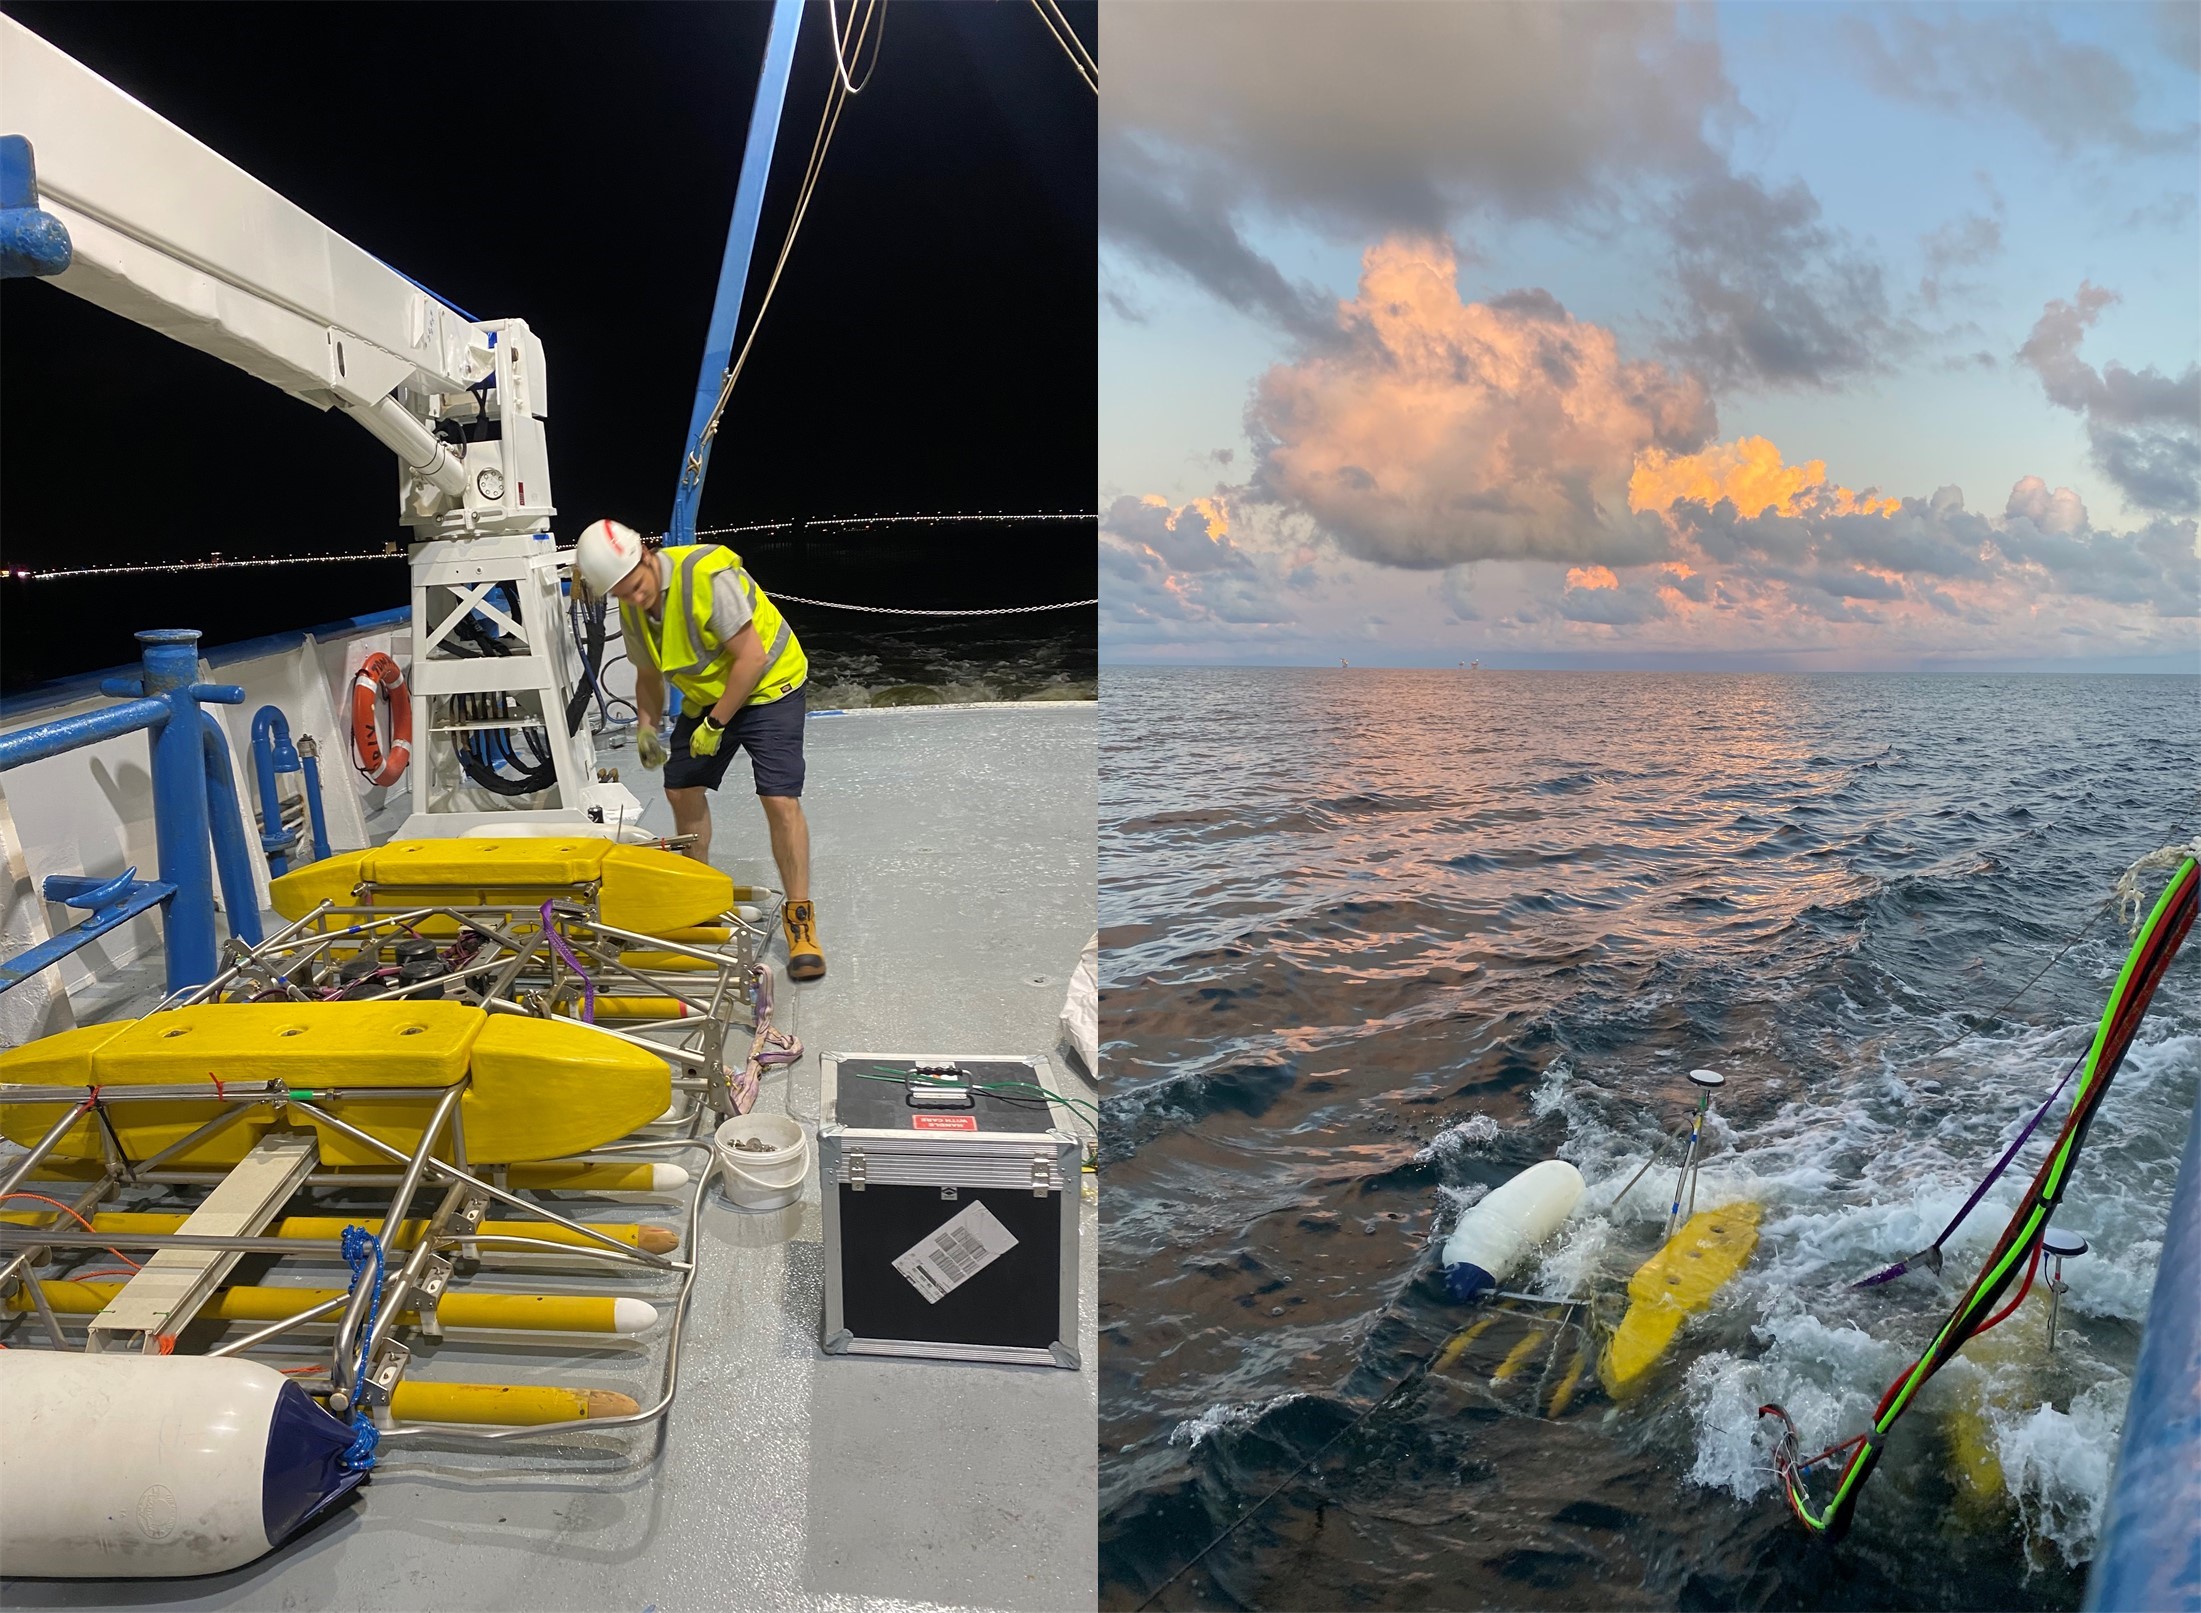 (left) the 3-D CHIRP gear getting setup on the deck of the boat and (right) the 3-D CHIRP array being towed off the sarboard side.